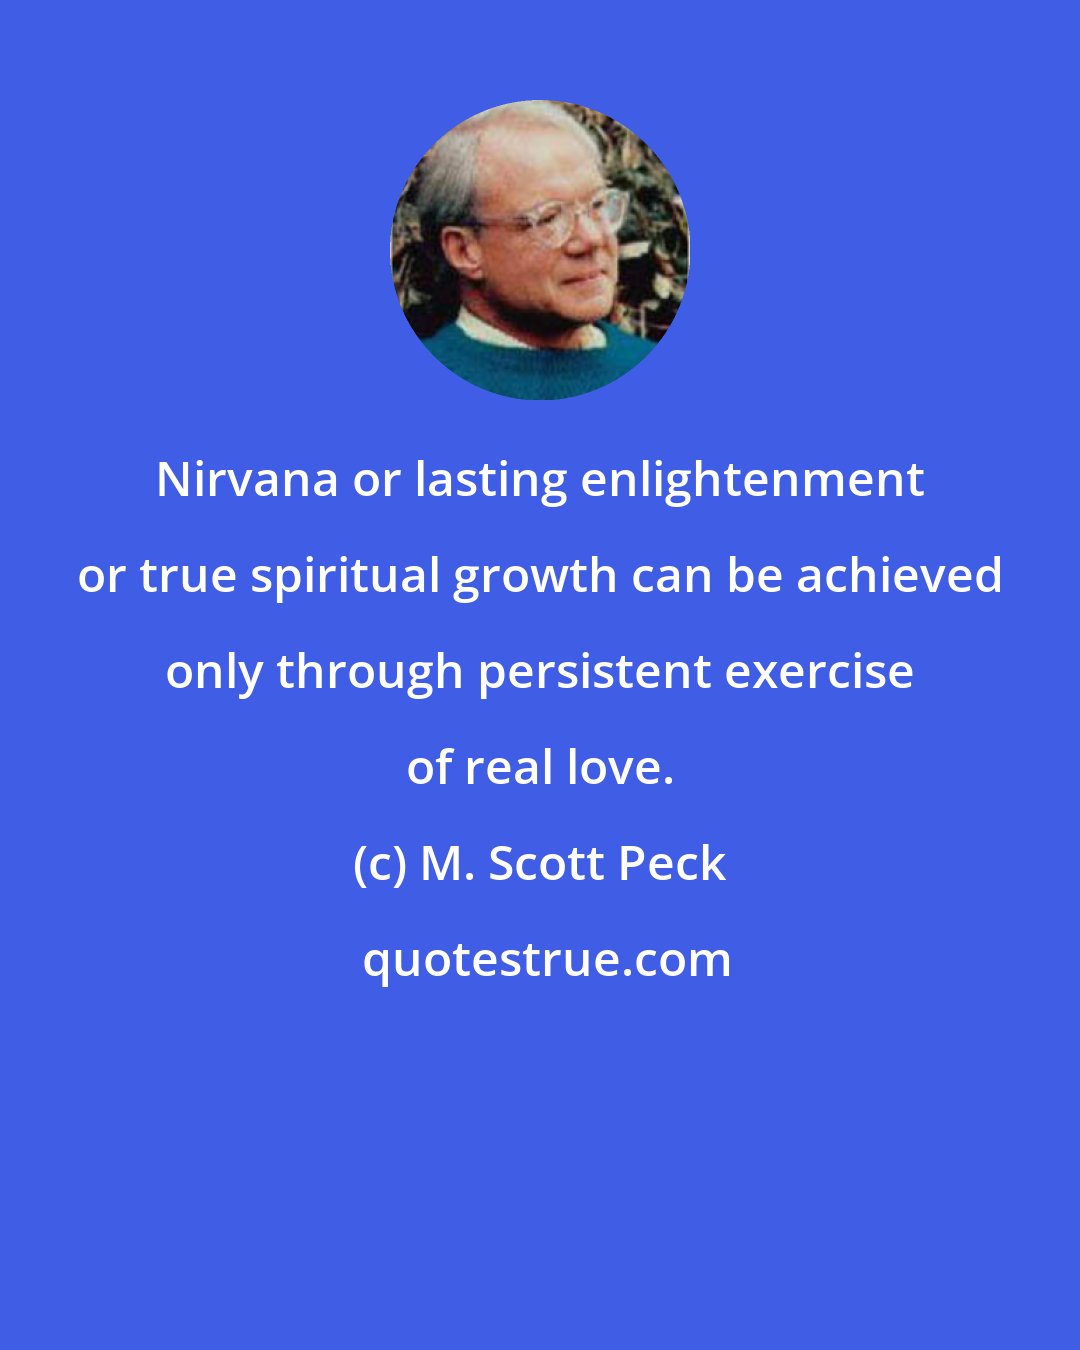 M. Scott Peck: Nirvana or lasting enlightenment or true spiritual growth can be achieved only through persistent exercise of real love.